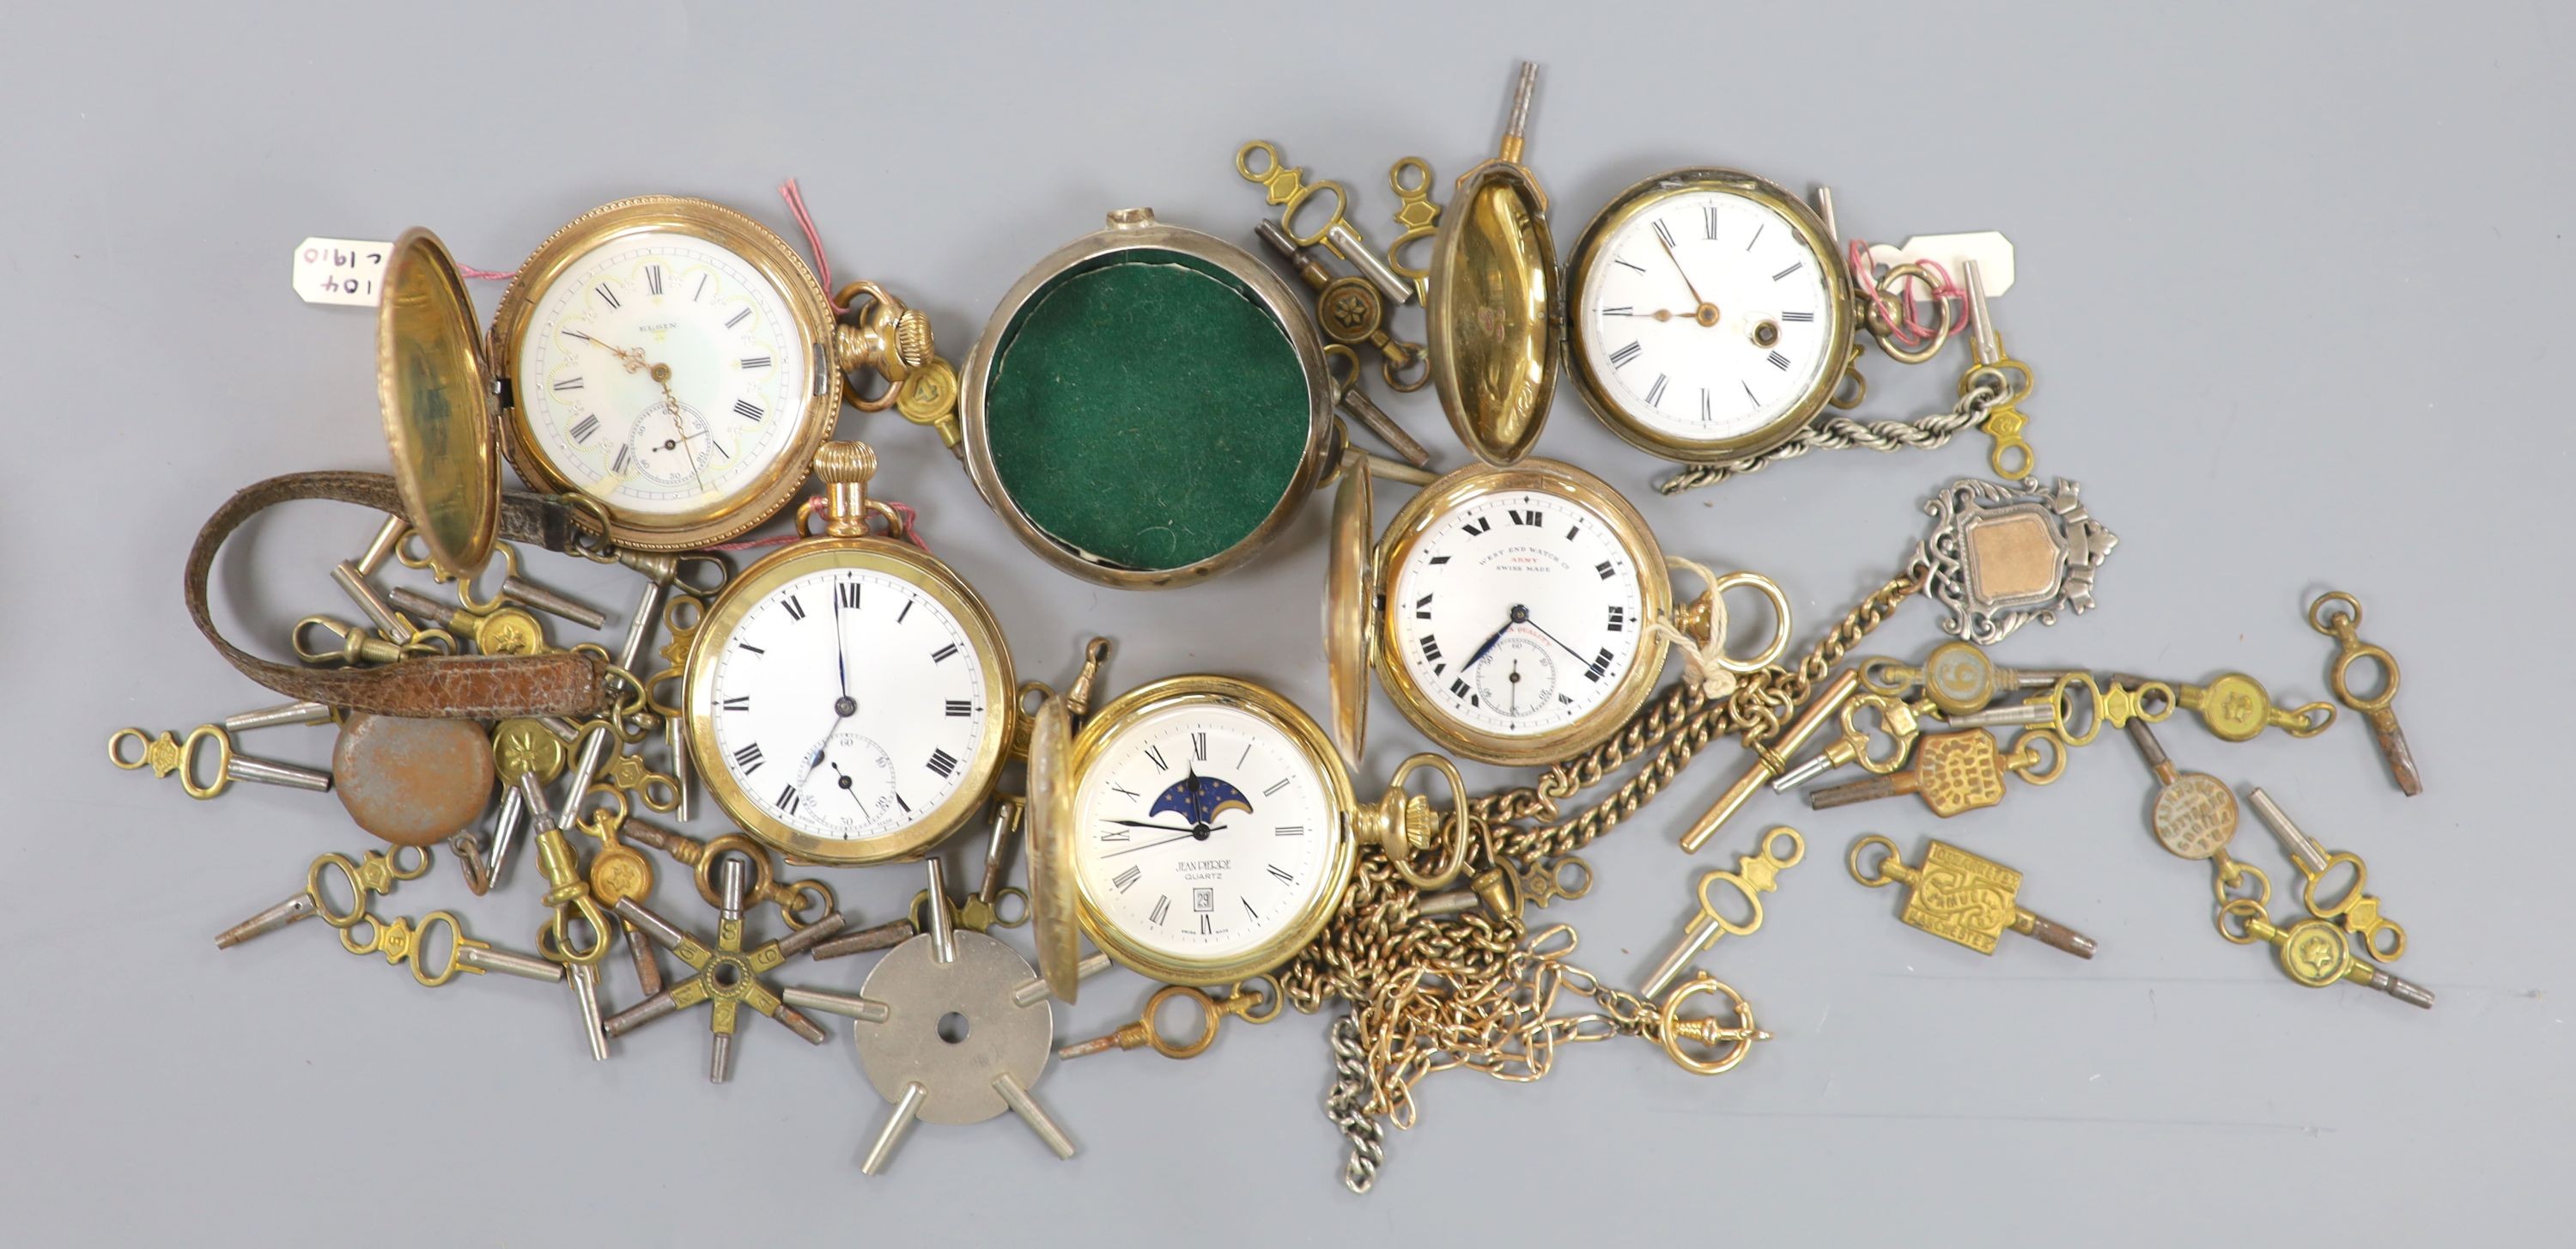 An early 20th century gold plated keyless pocket watch, a gold plated half hunter, three other pocket watches and watch accessories, including keys.